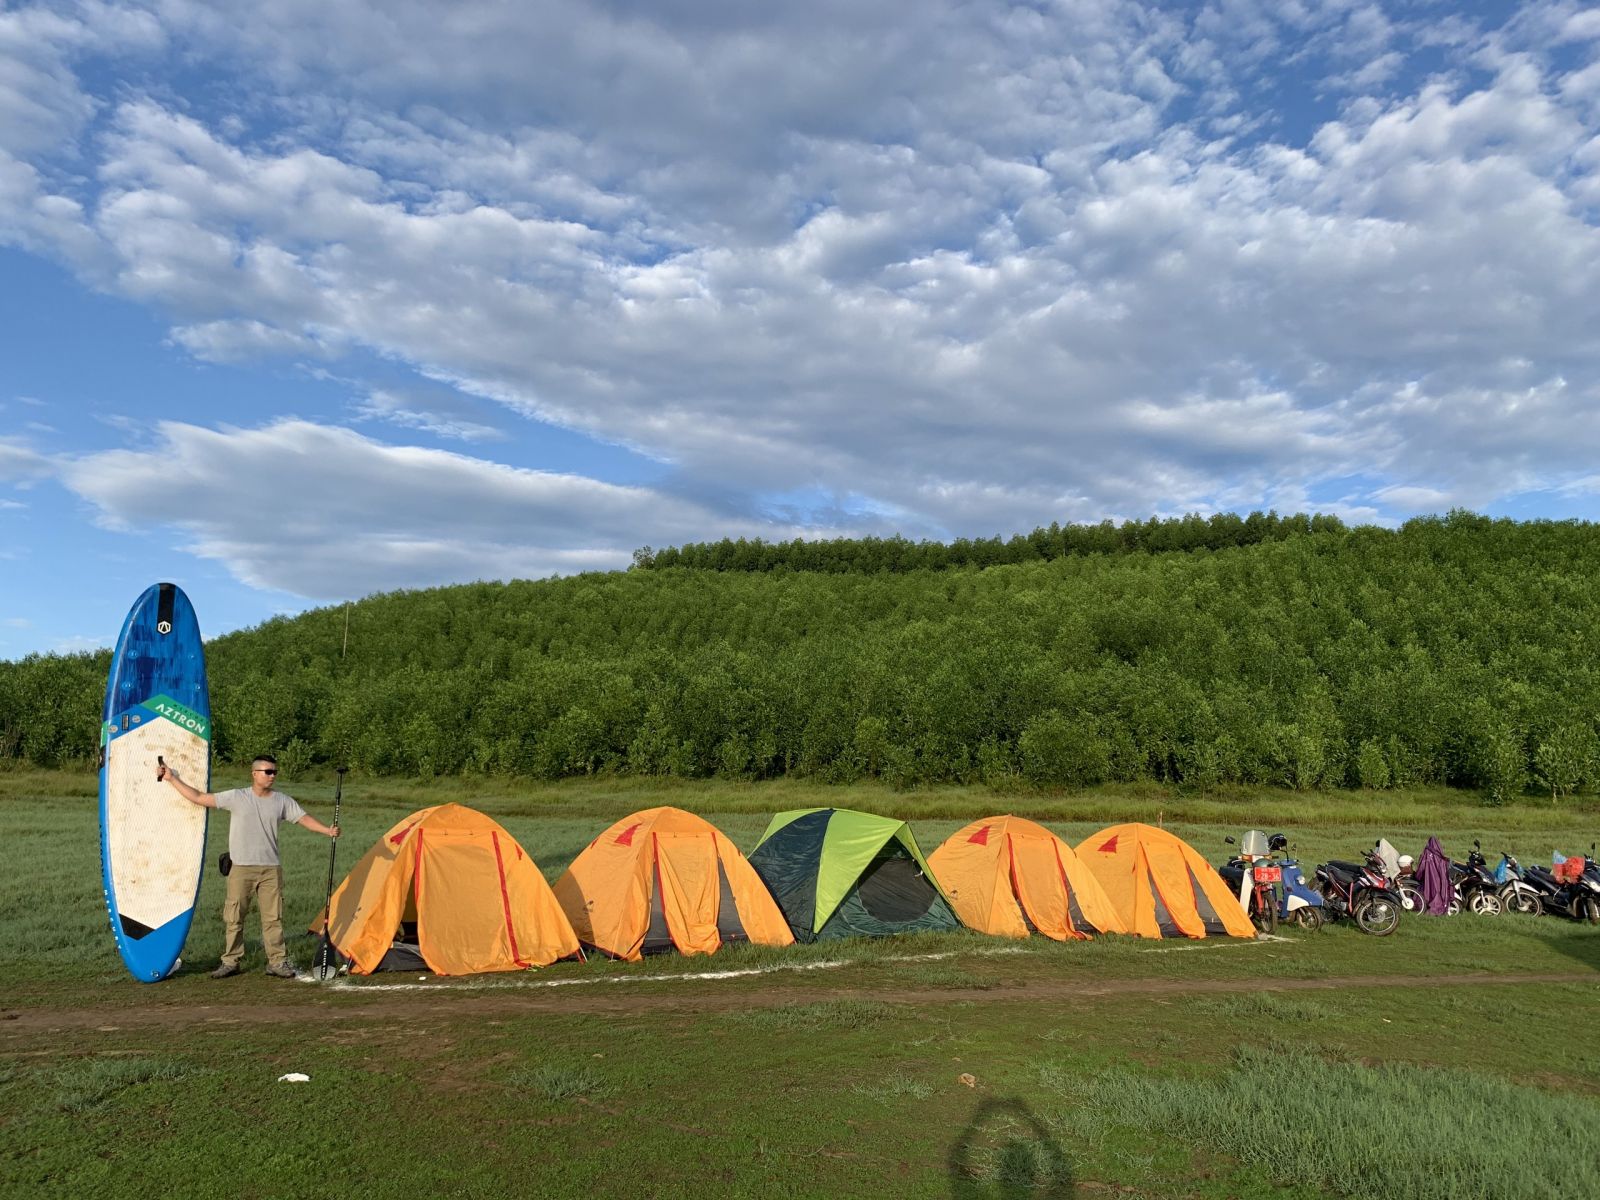 Camping and boating in Khe Rung Lake are the new experiences of the youngsters